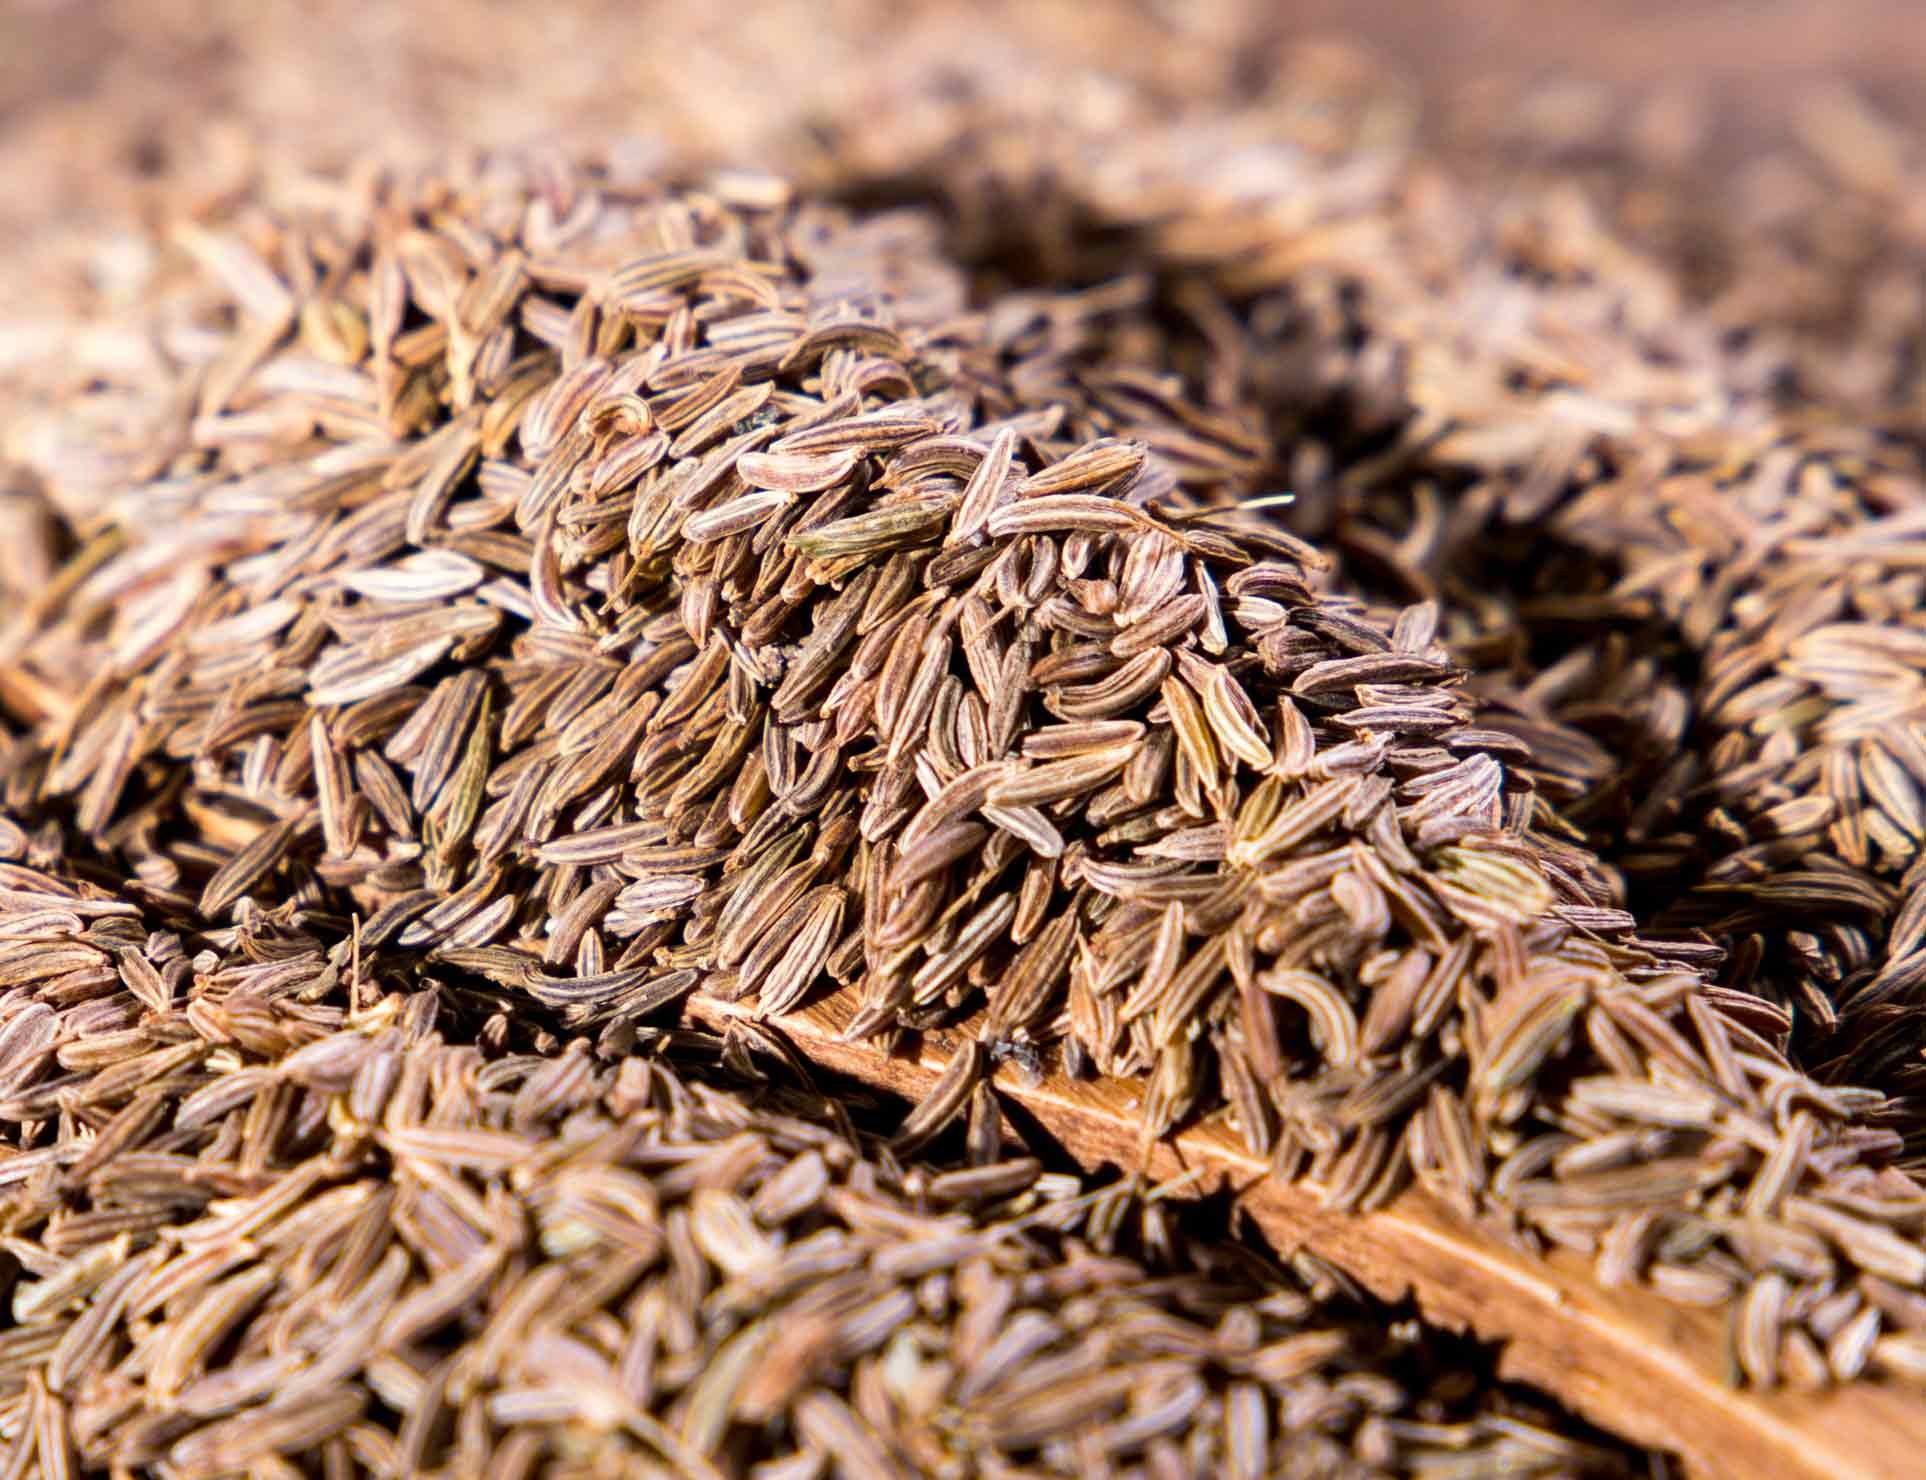 High-quality caraway, Buy caraway seeds, Competitive price, Premium spice, 1930x1480 HD Desktop